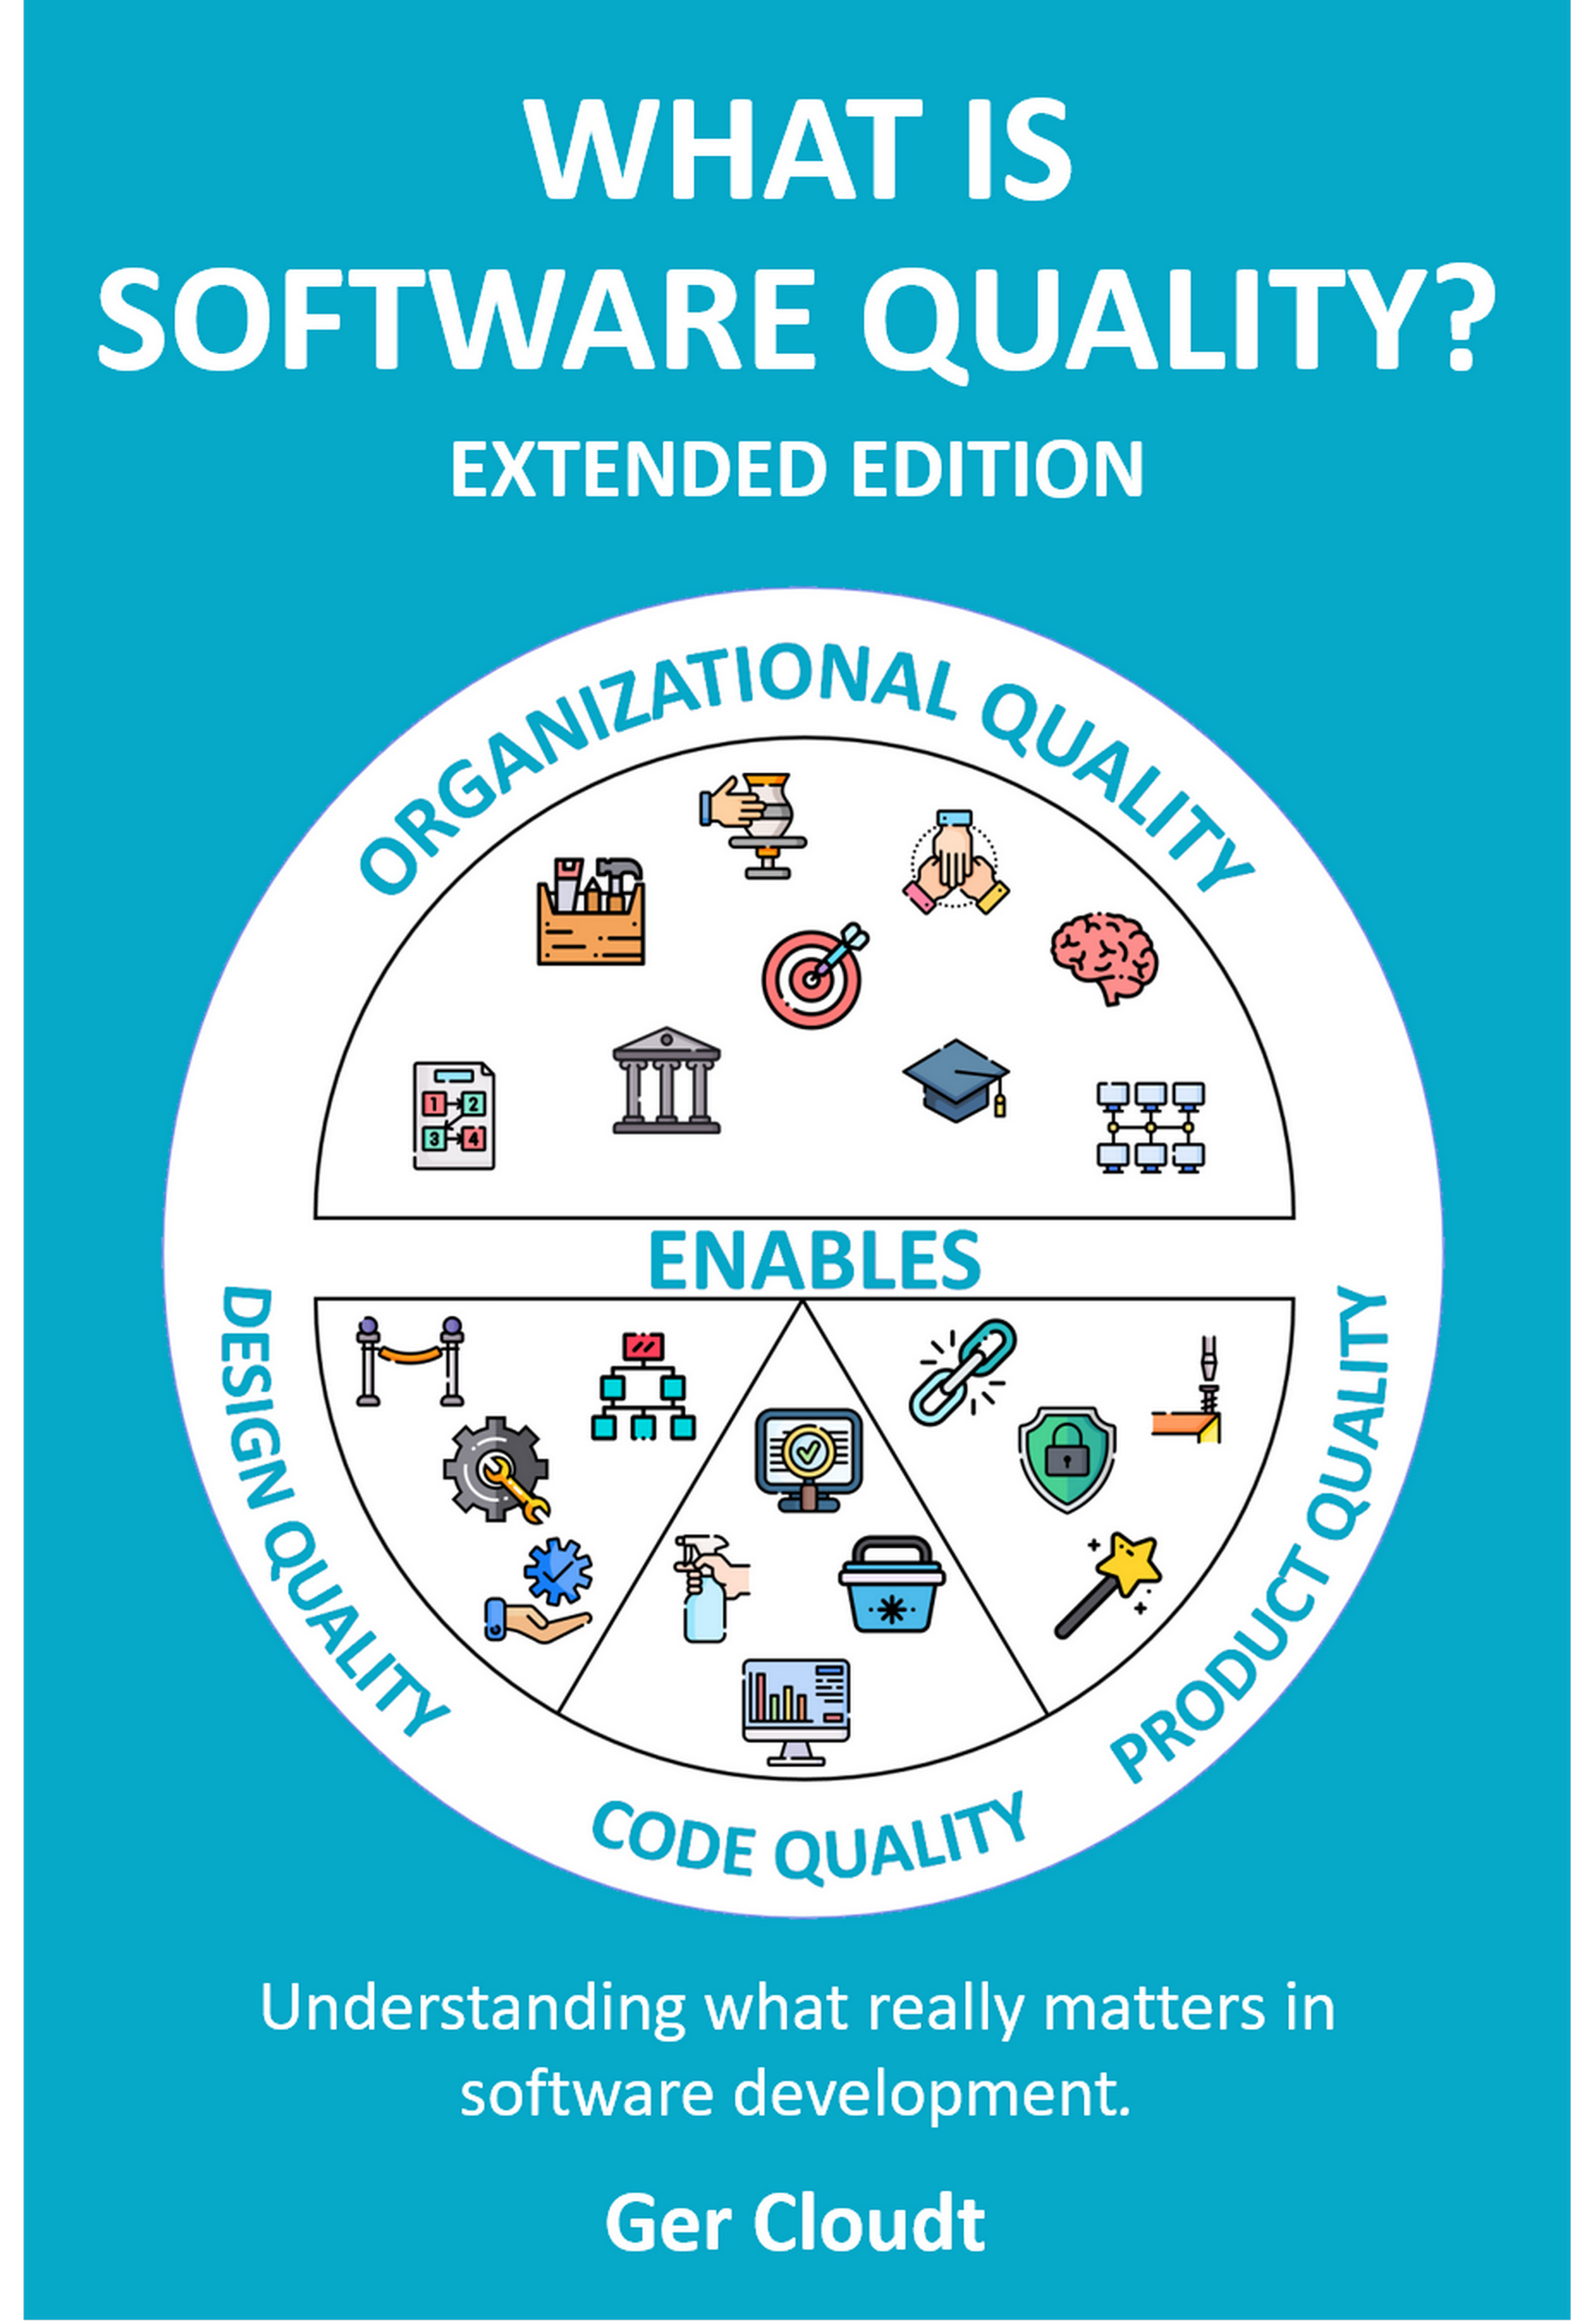 book - English - "What is Software Quality?- Extended Edition"